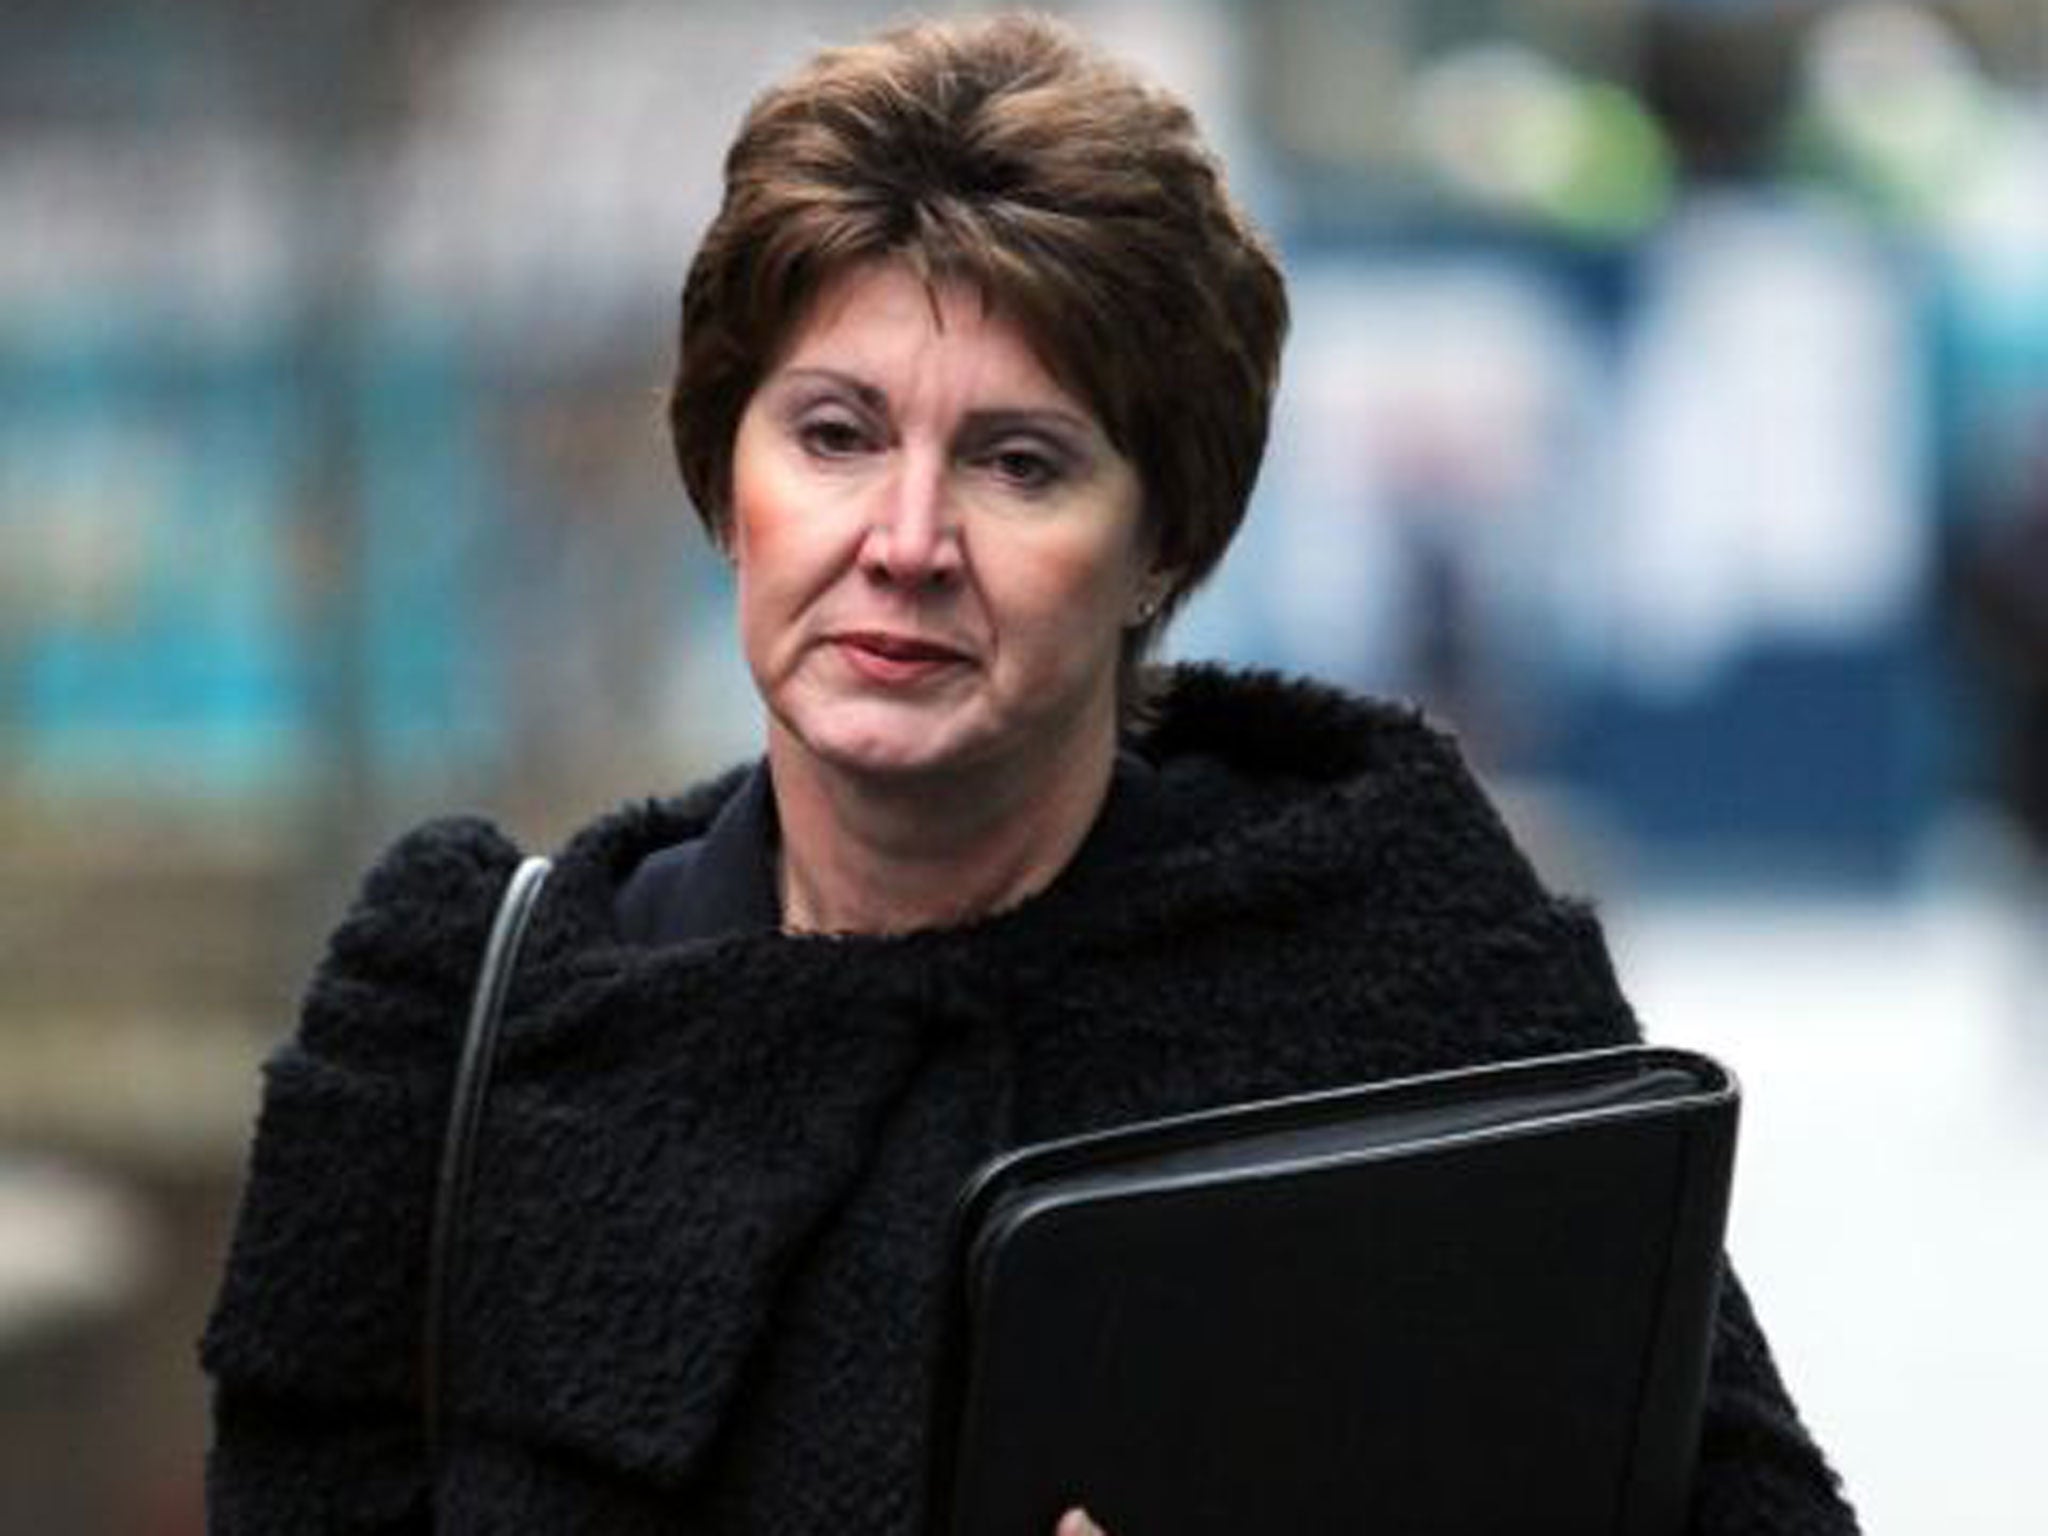 Deputy Chief Inspector April Casburn is accused of one count of misconduct in public office in September 2010